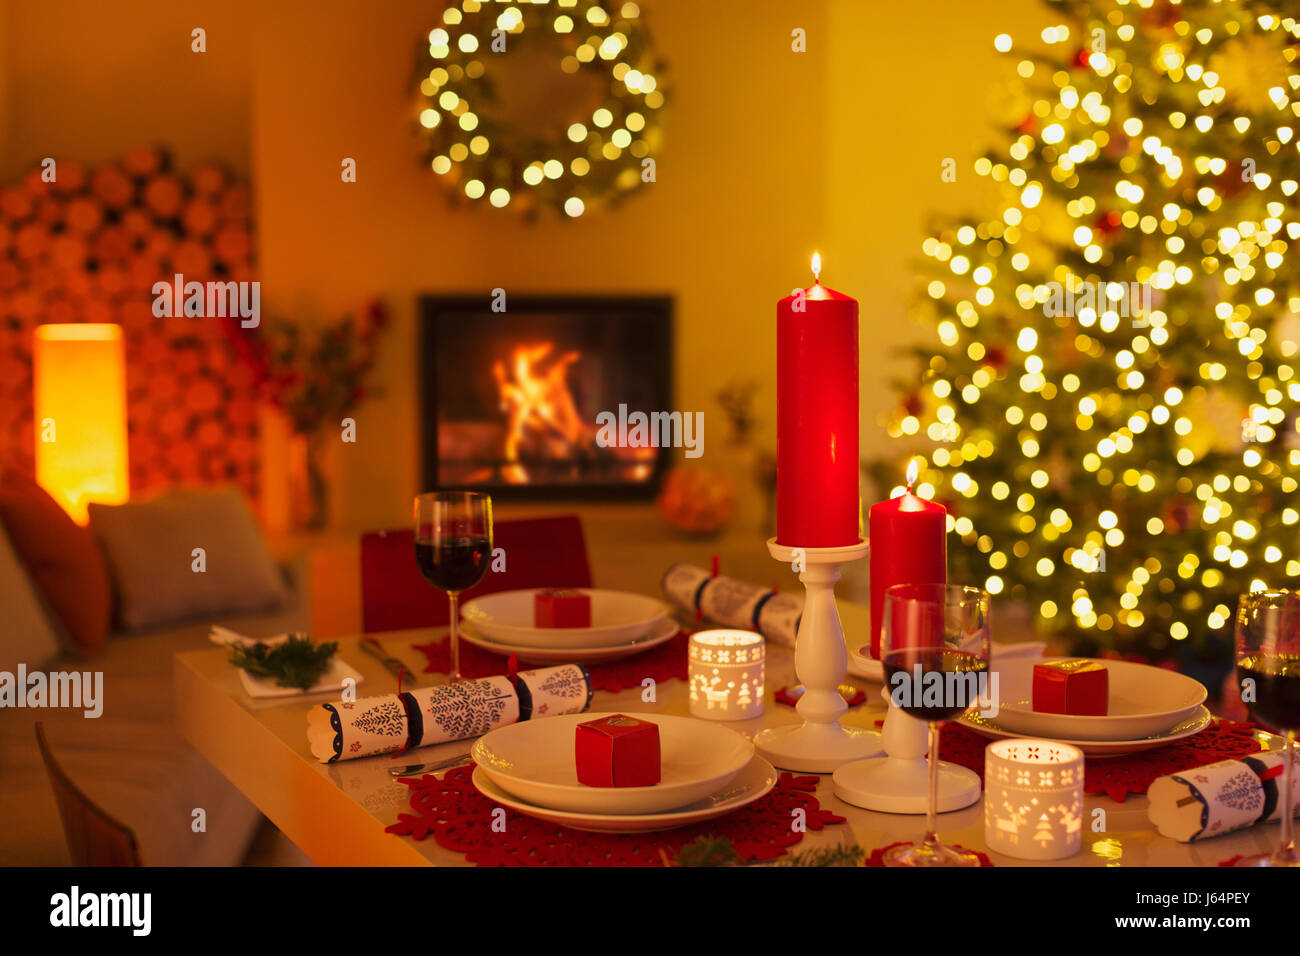 Ambient candles and Christmas crackers on dinner table in living room with fireplace and Christmas tree Stock Photo